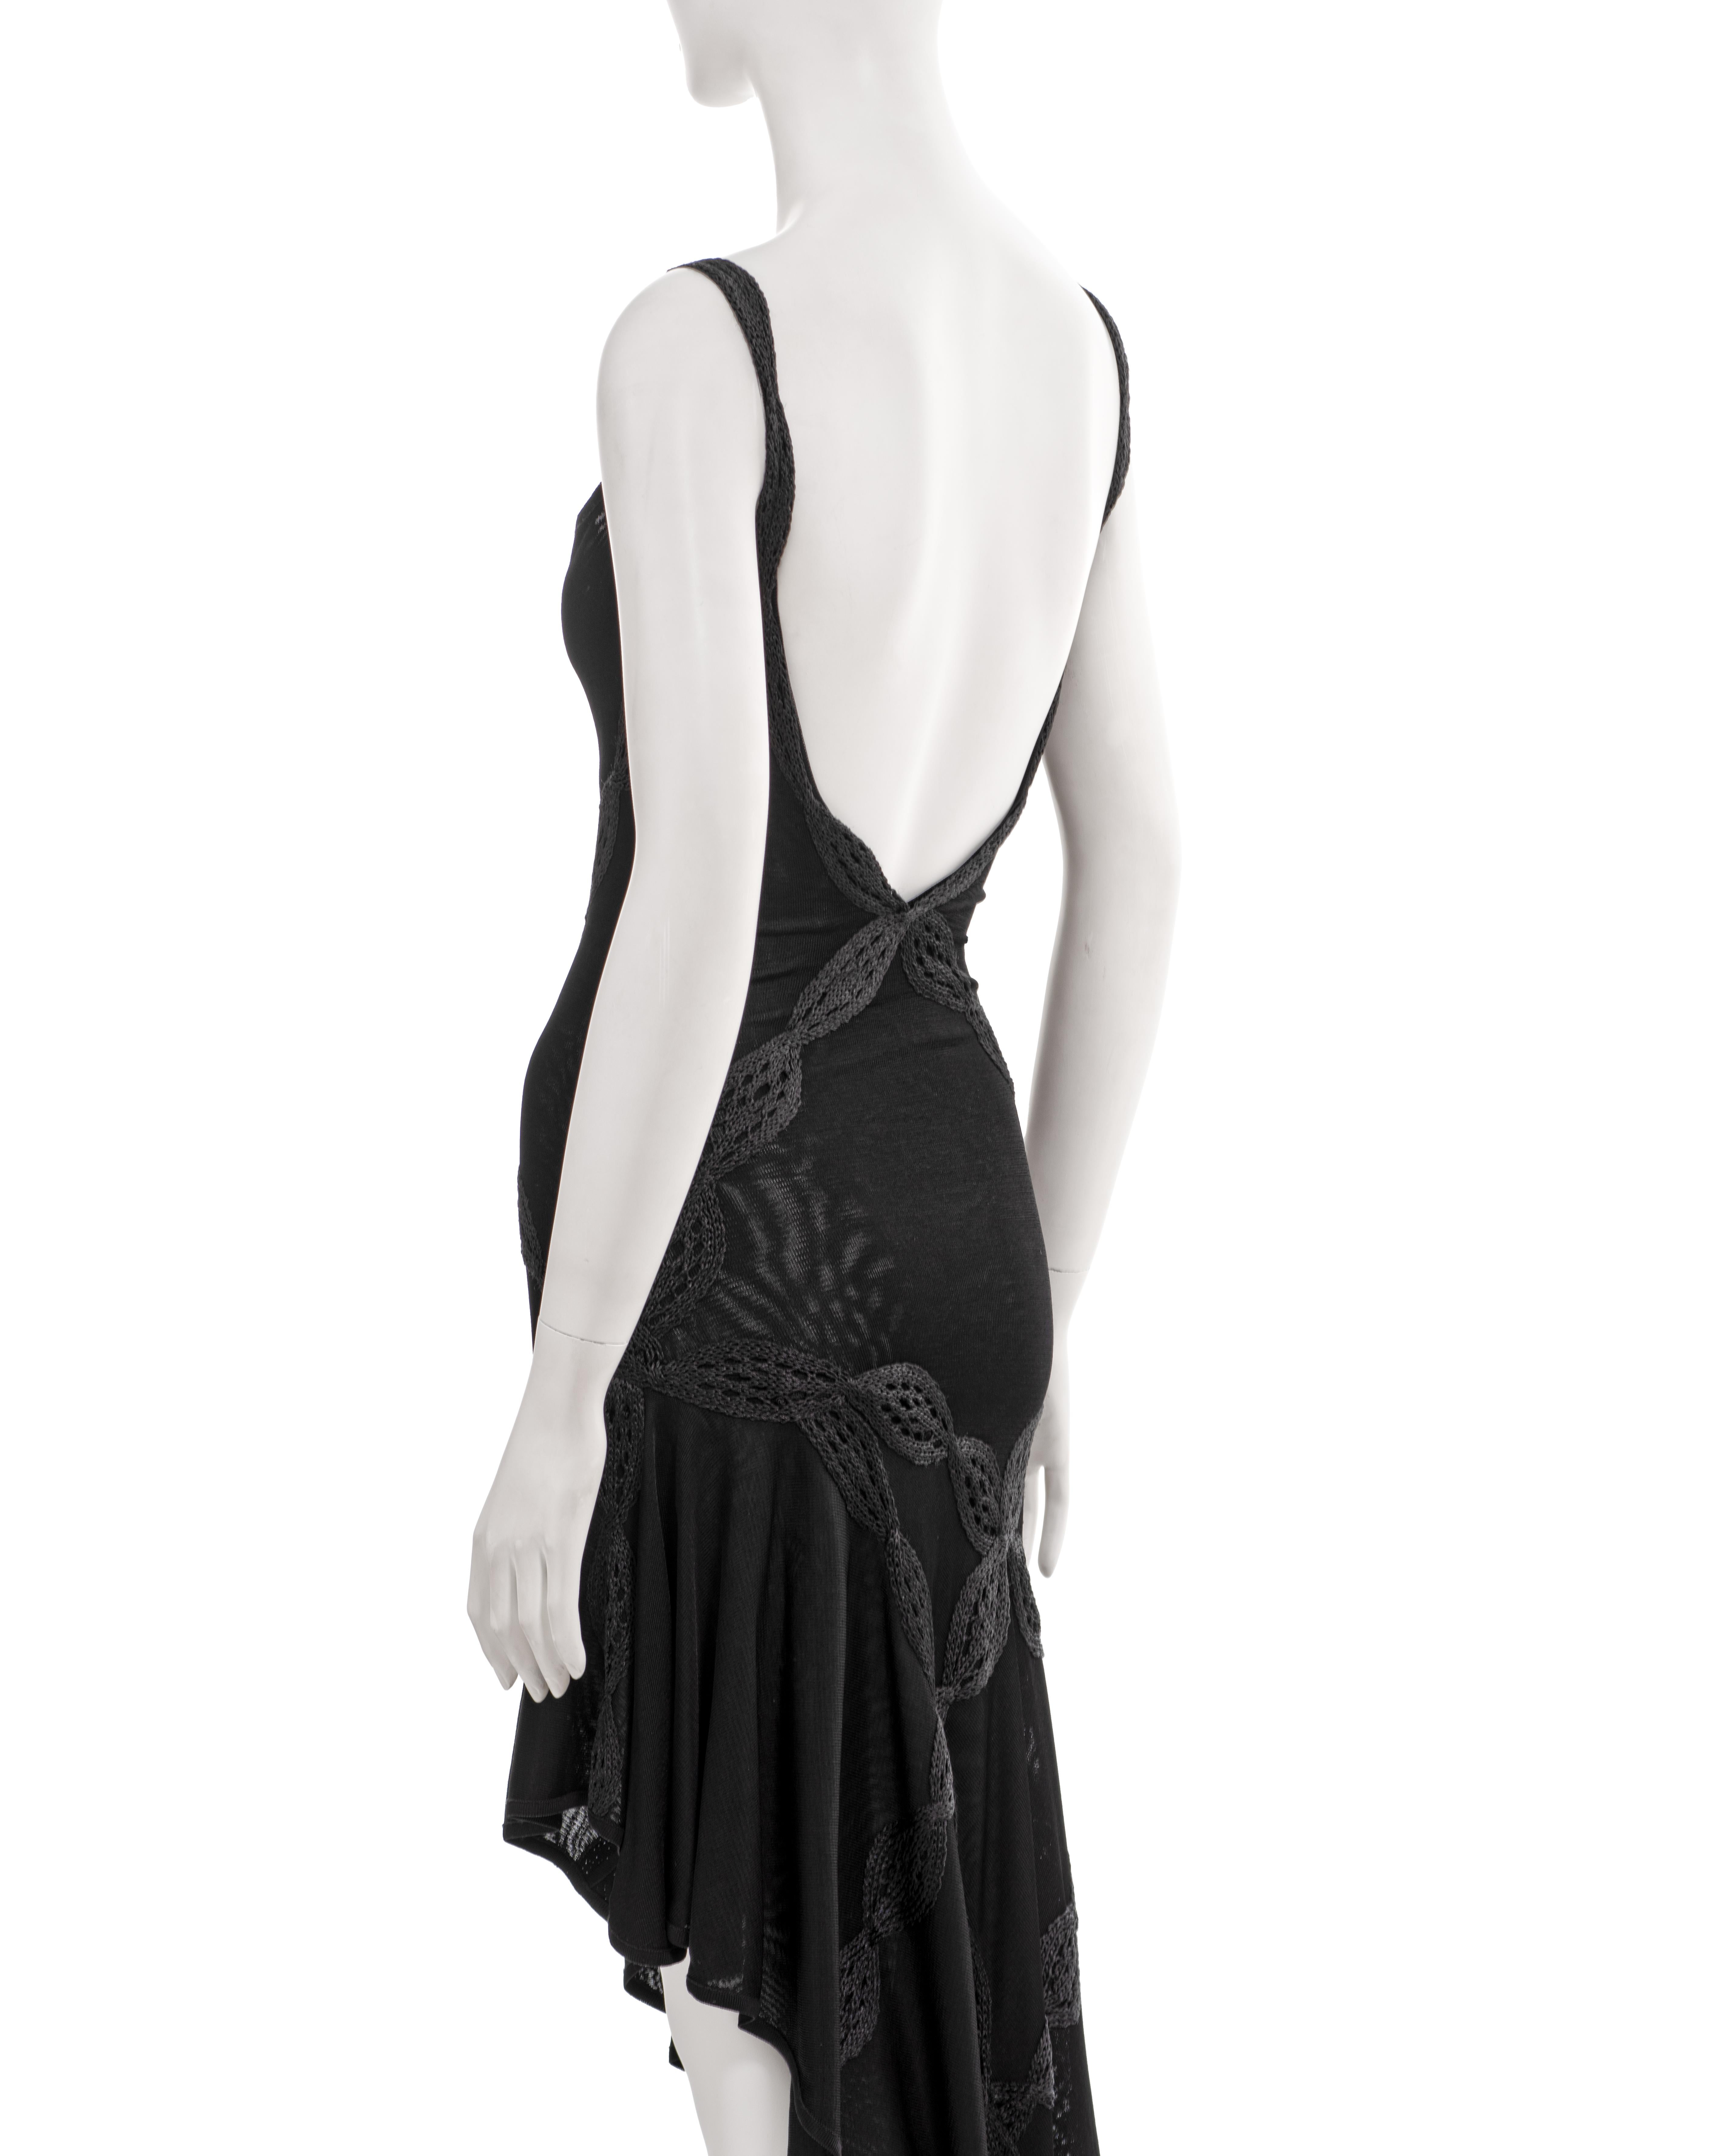 Christian Dior by John Galliano black embroidered knit evening dress, ss 2001 For Sale 6